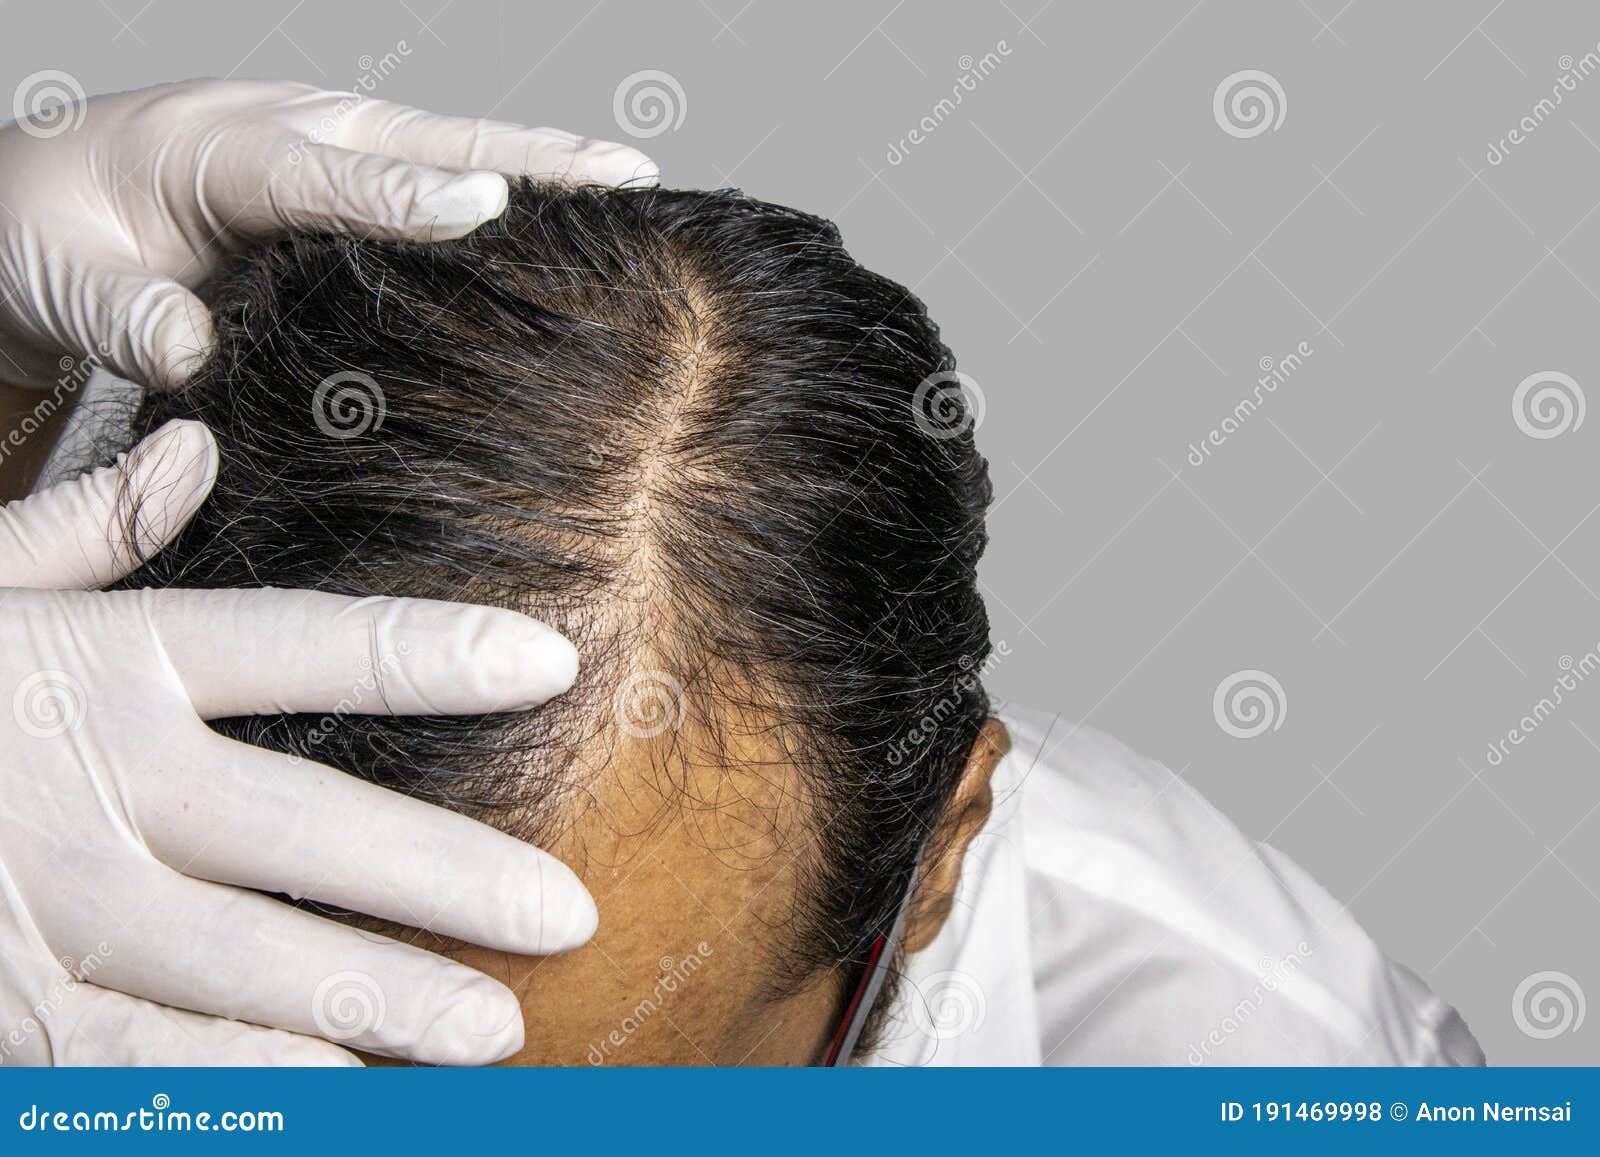 Hair Loss Specialist Wearing Gloves Use Both Hands on Head of a Man Stock  Photo - Image of glass, closeup: 191469998